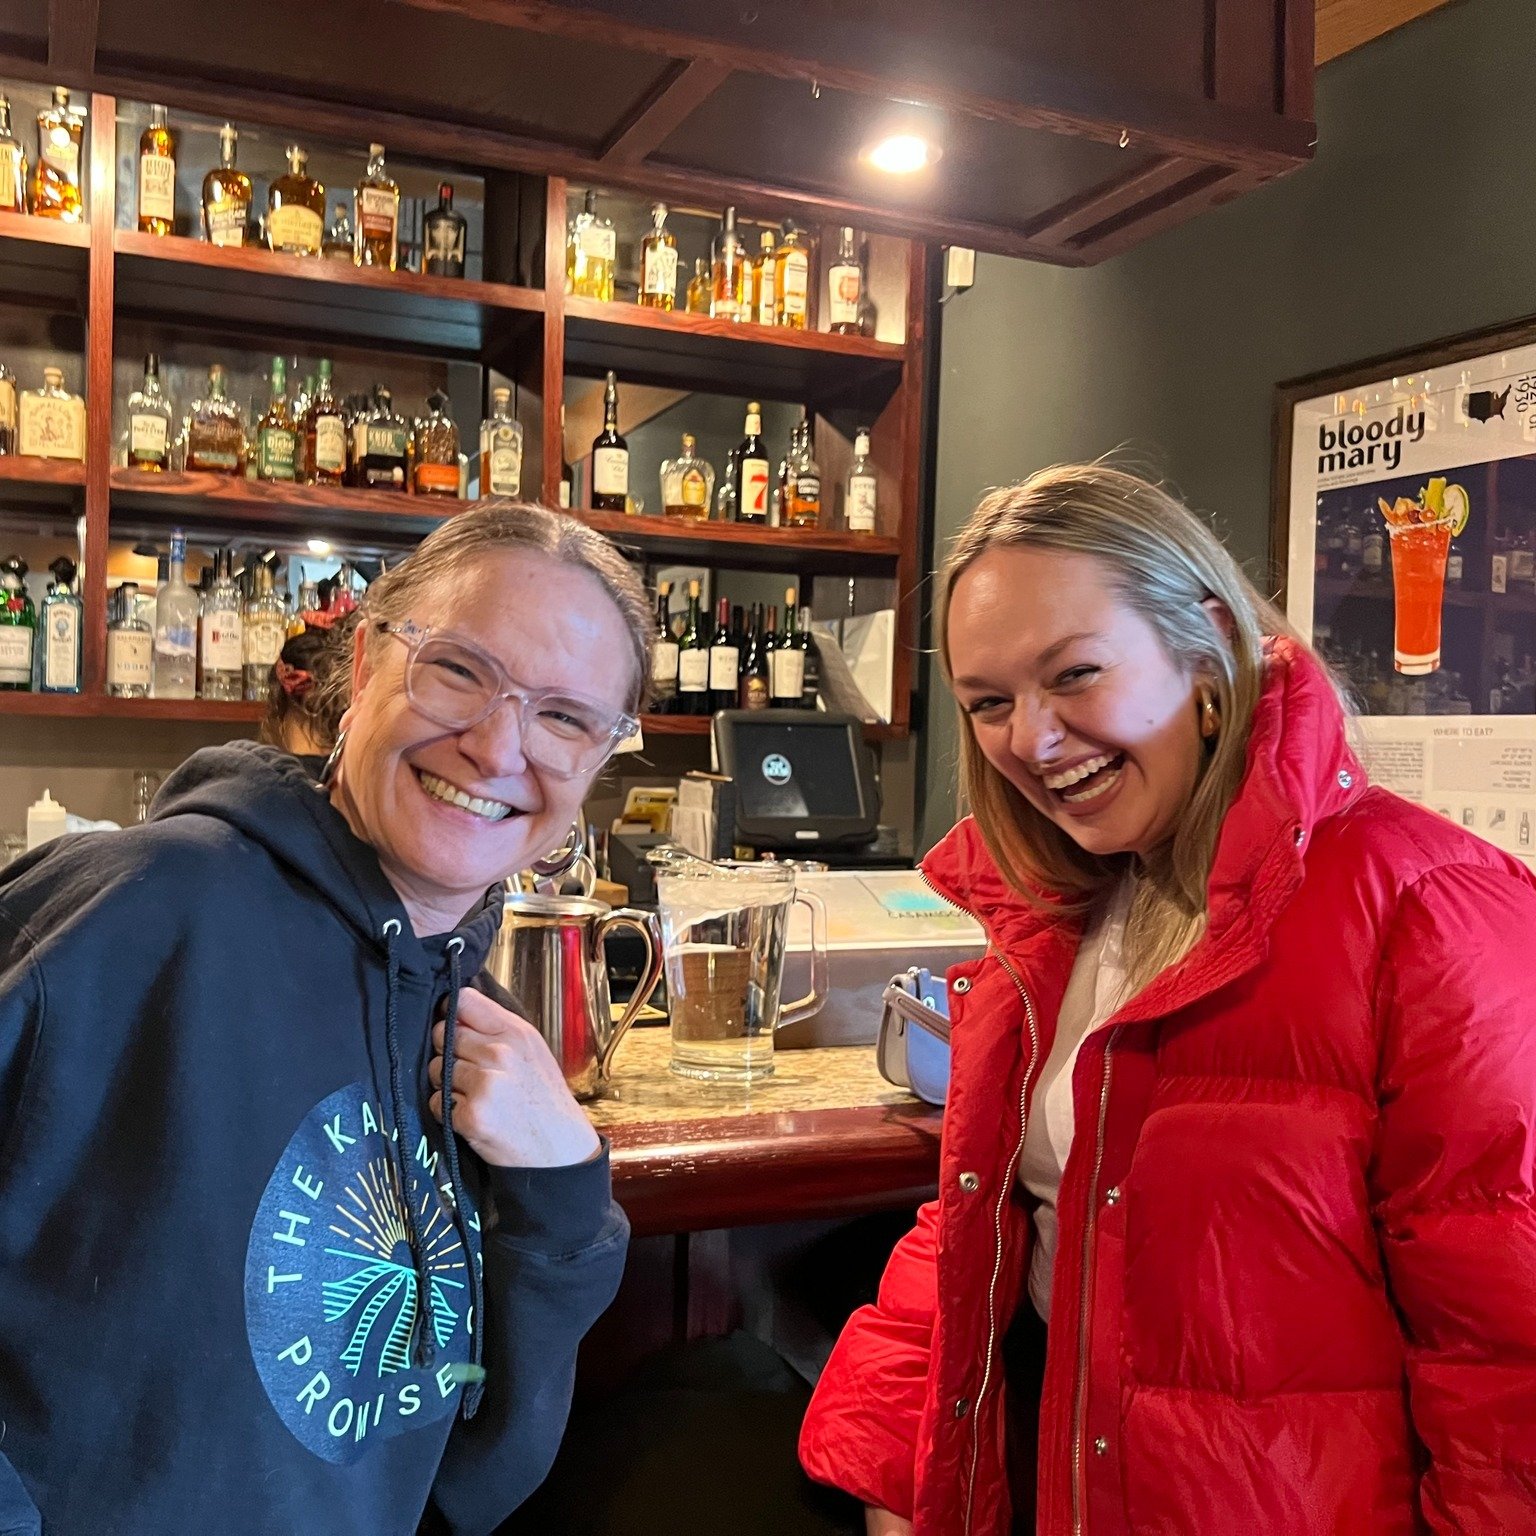 The team at Global Ties Kalamazoo is so incredibly grateful to you for being a treasured coworker and friend, Emma Baratta. Please join us in an early celebration of her birthday since the big day takes place over the weekend! Let's throw an epic par